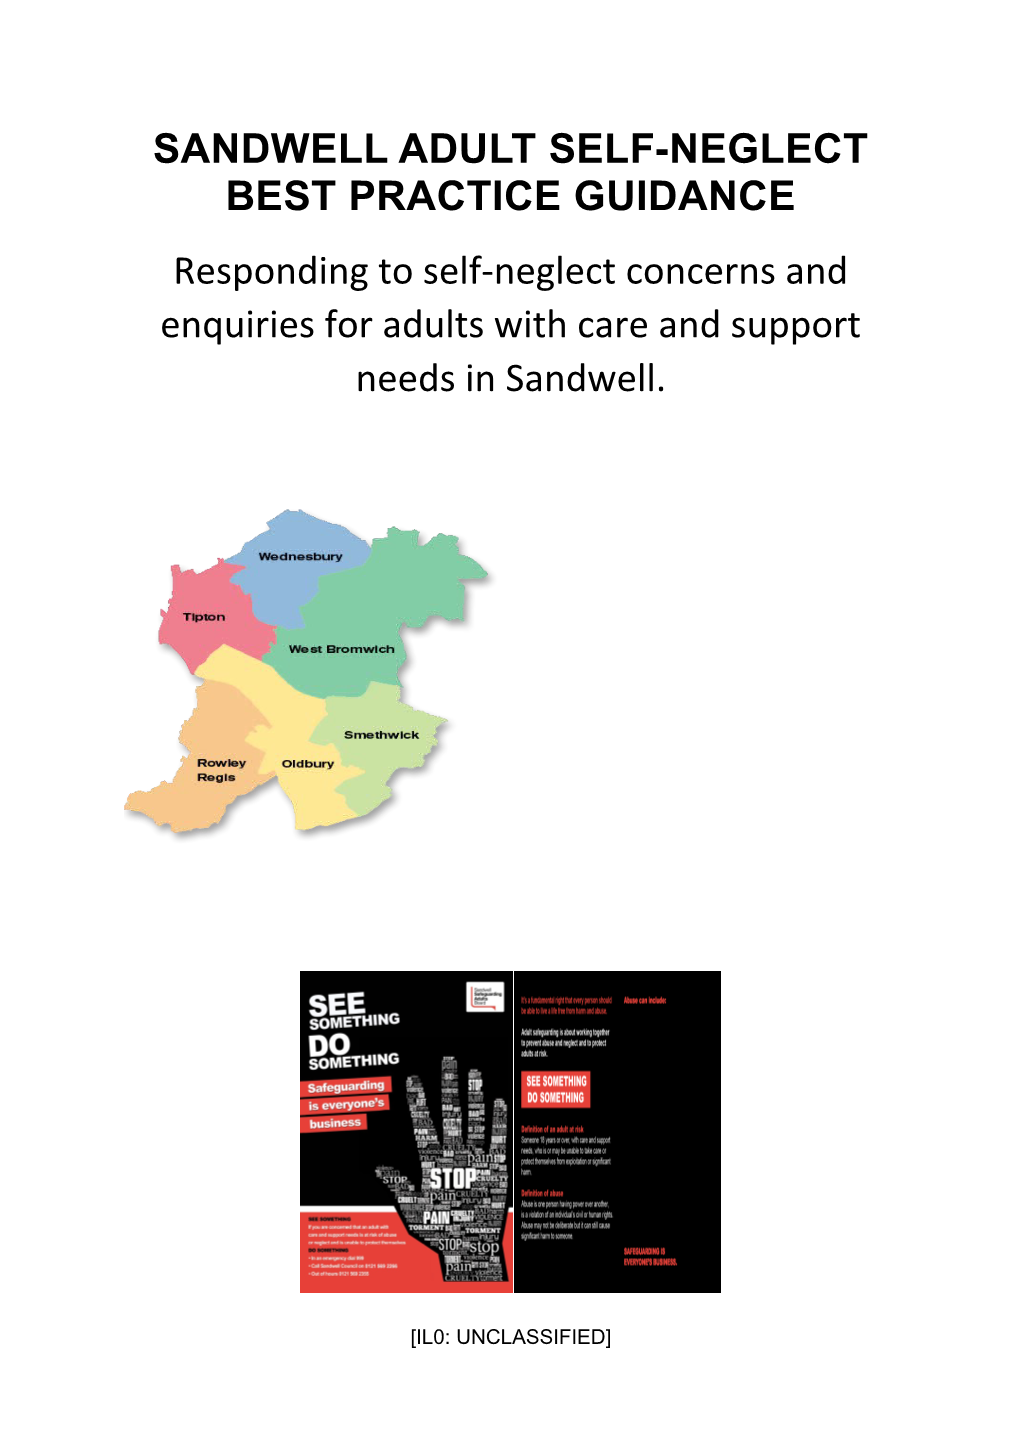 Sandwell Adult Self-Neglect Best Practice Guidance